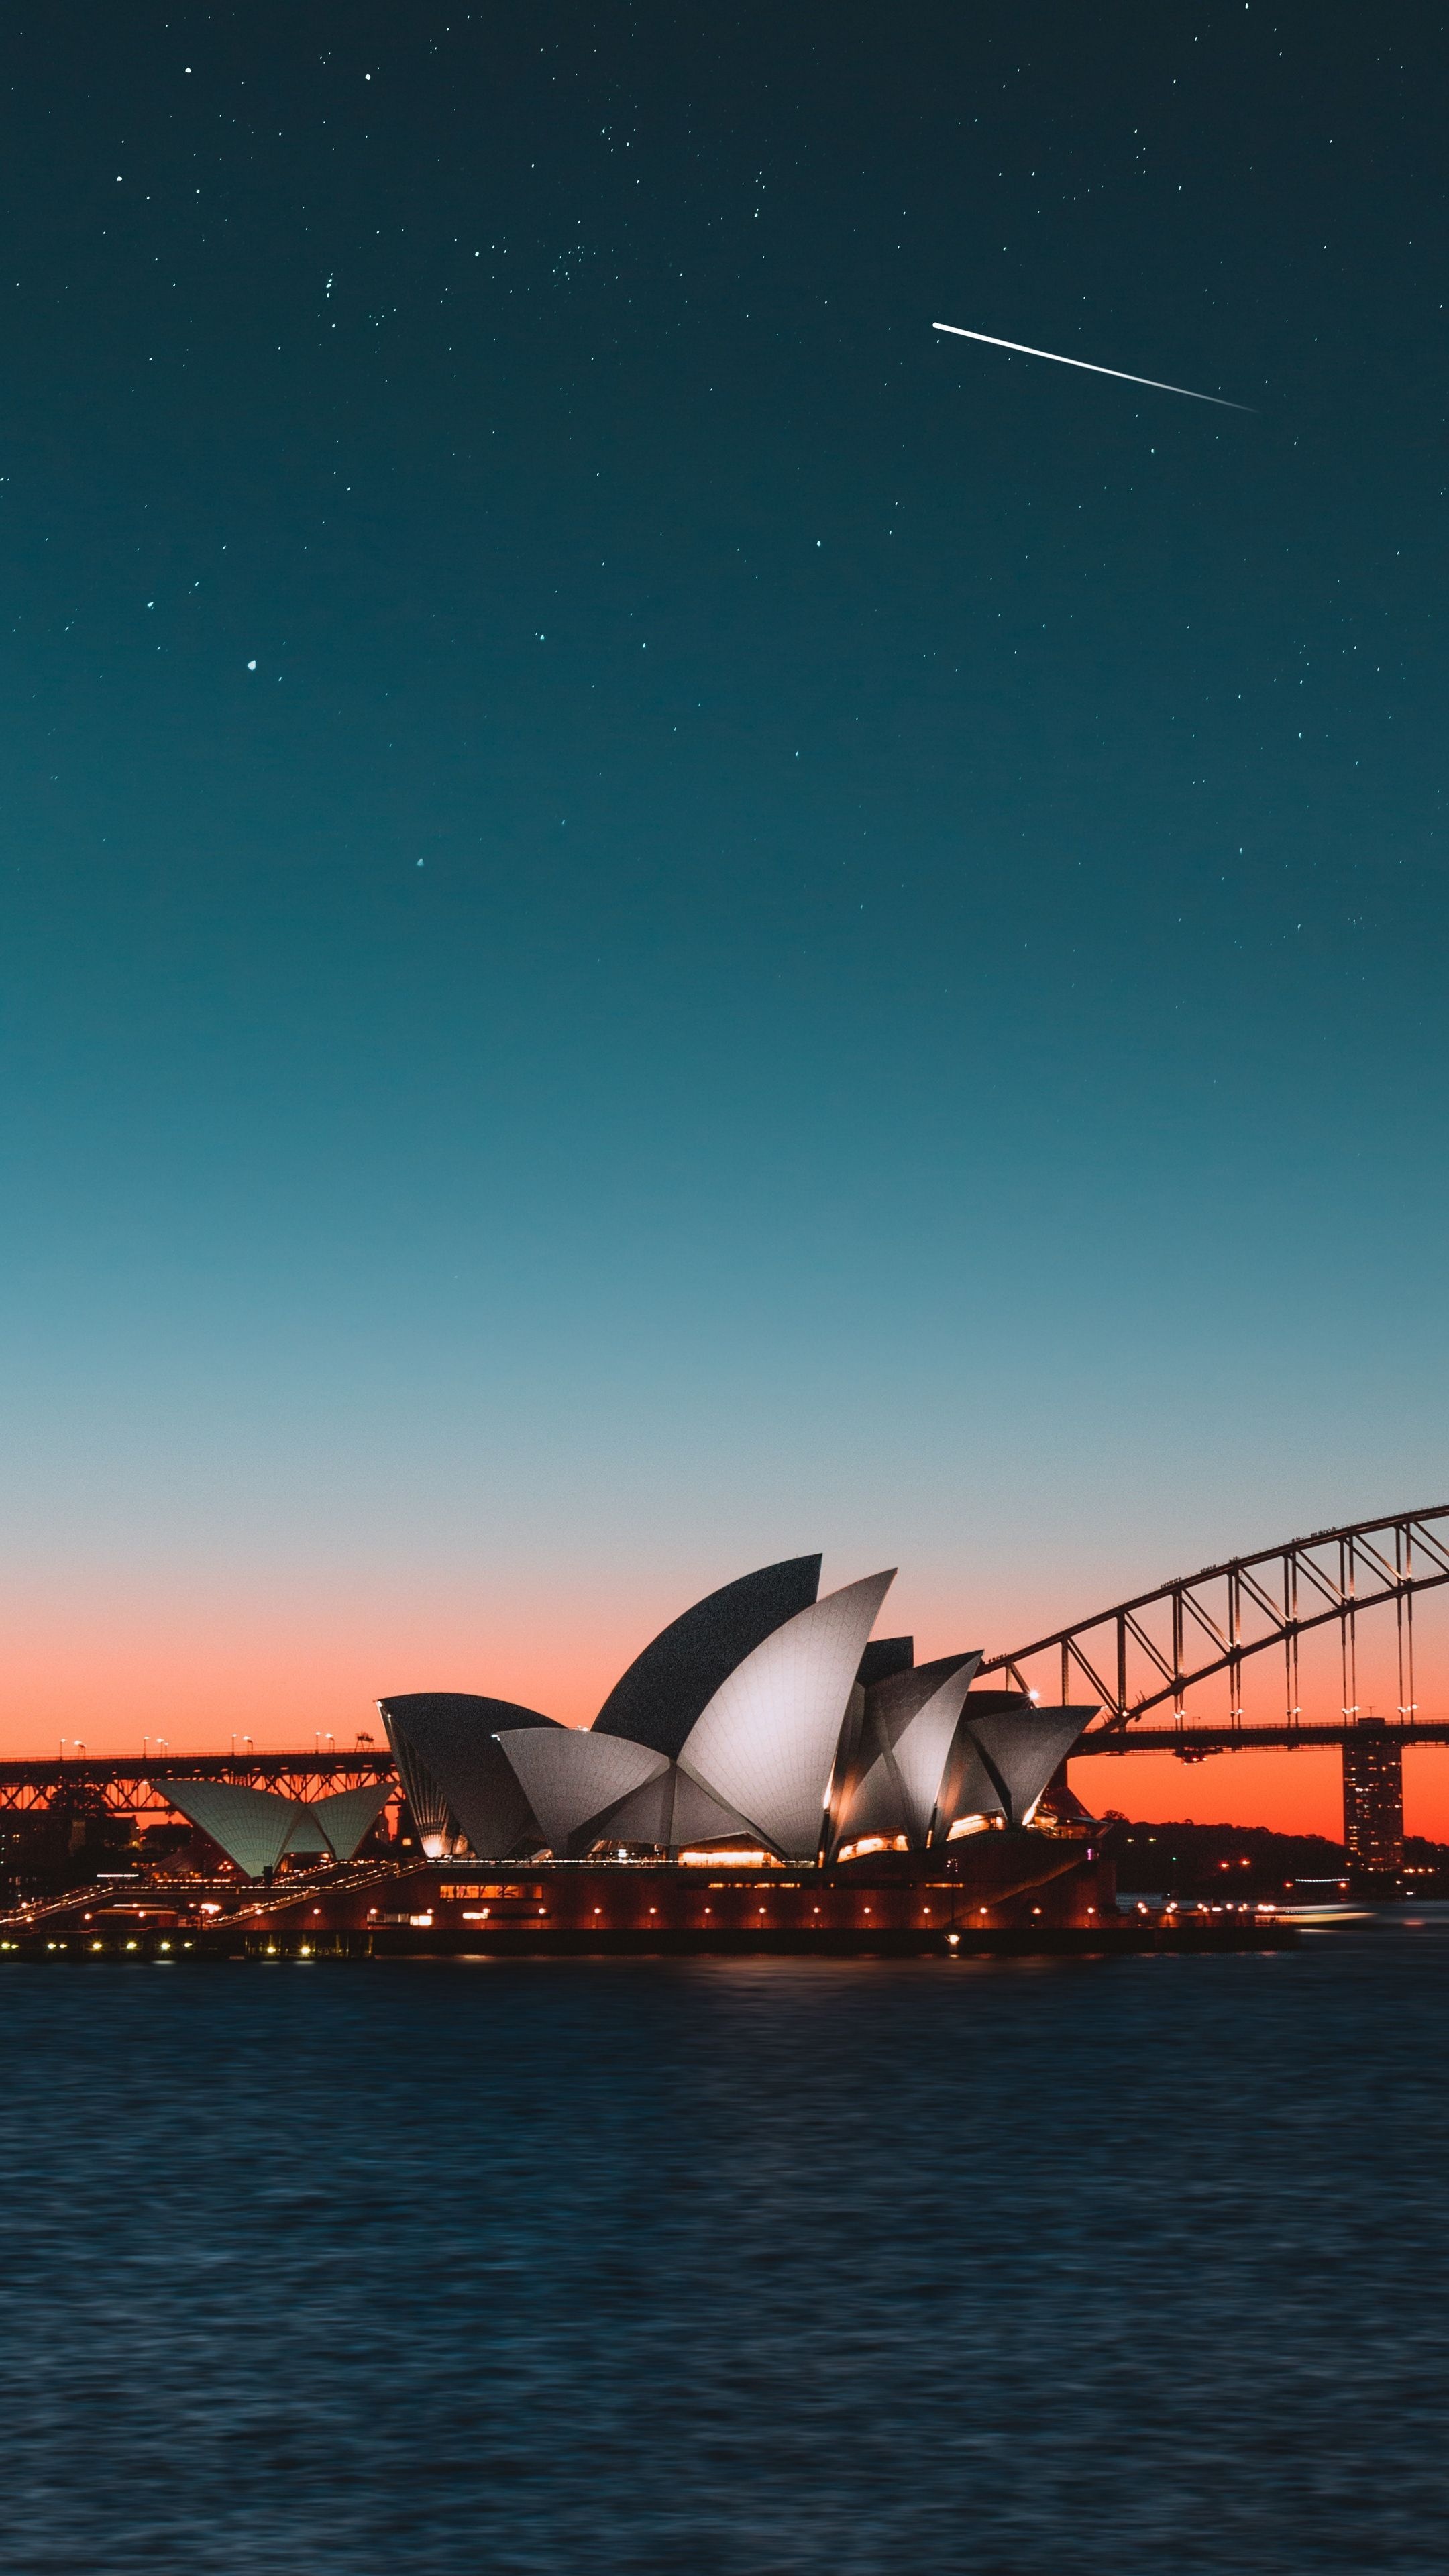 Sydney: The most populous city in both Australia and Oceania. 2160x3840 4K Wallpaper.